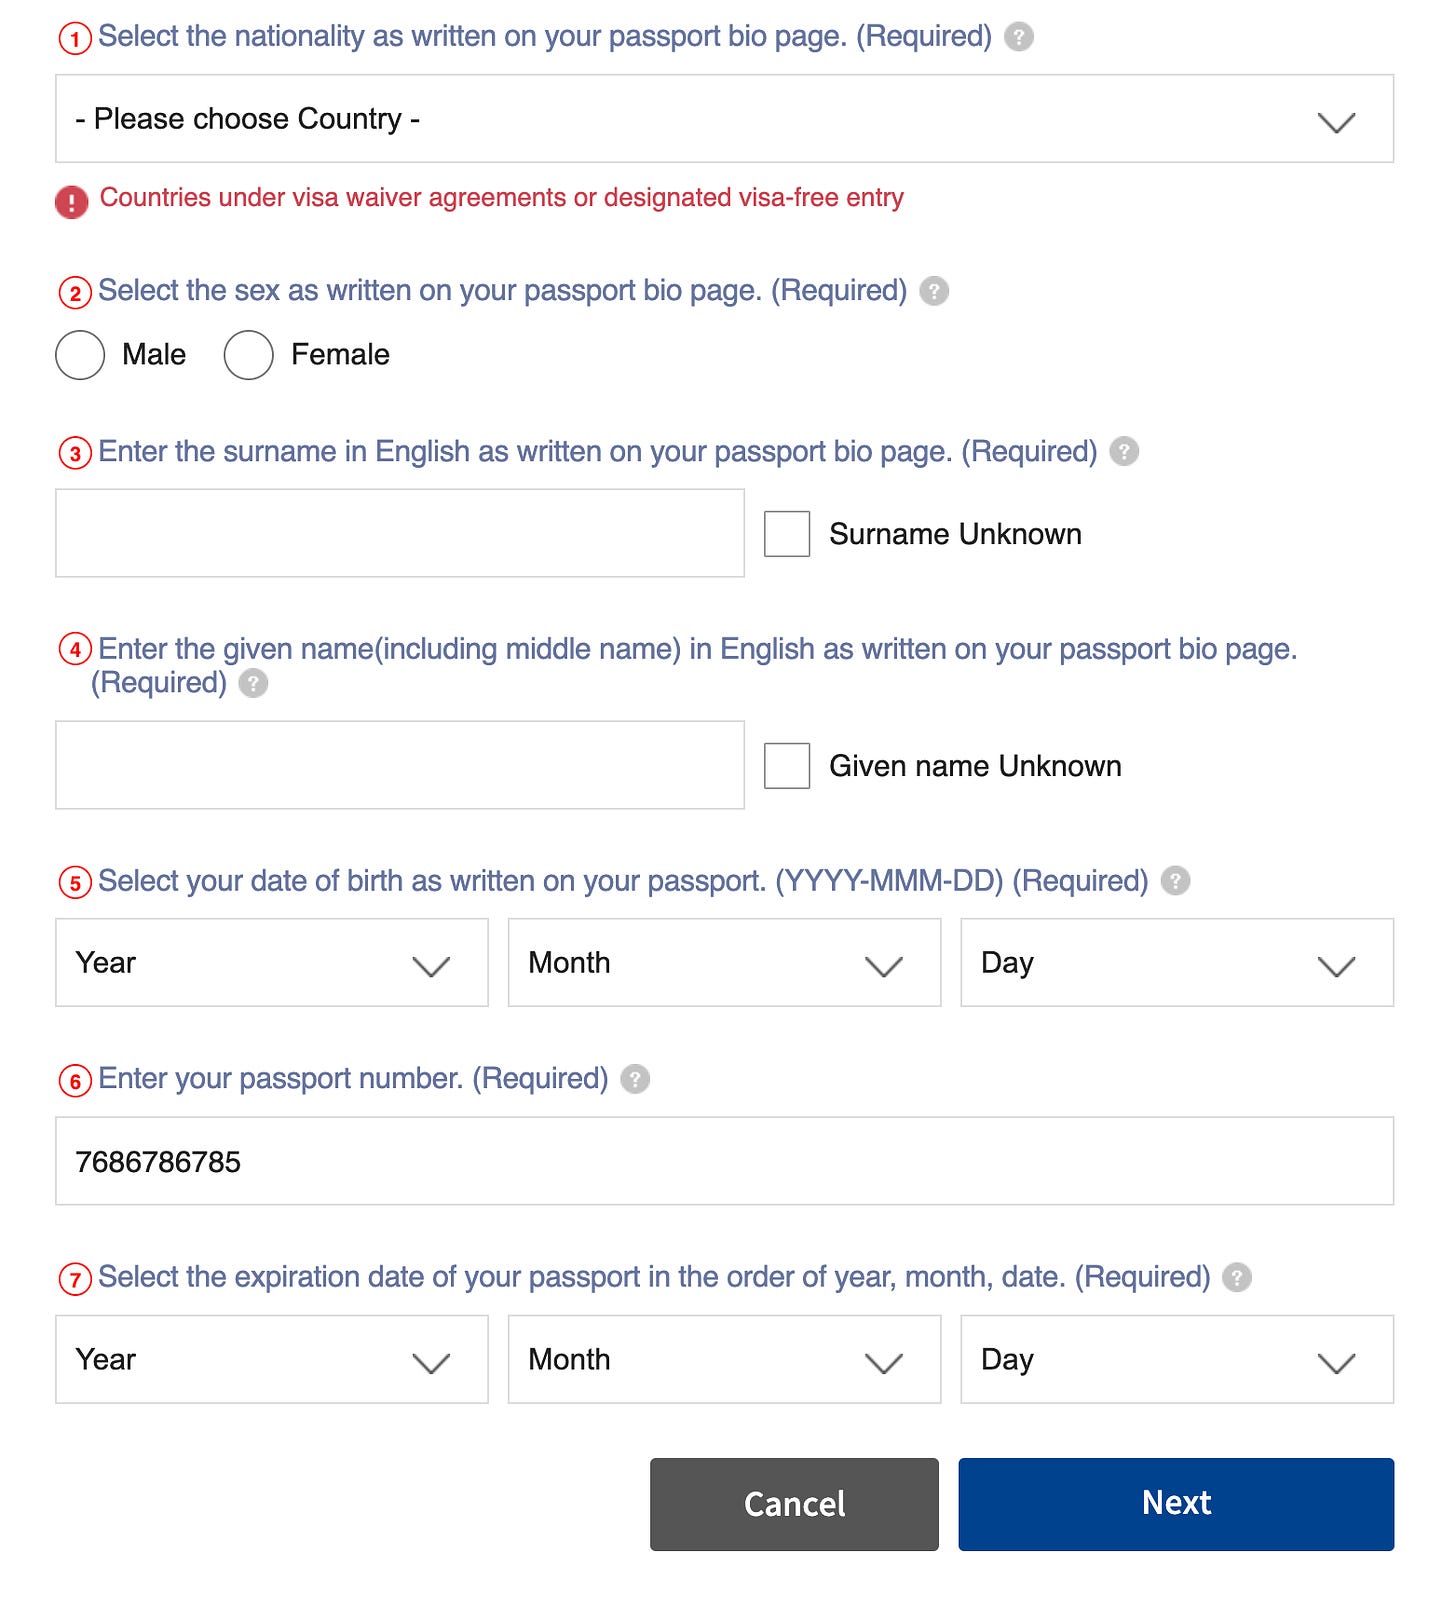 Form fields: nationality, sex, surname, given name, date of birth, passport name, passport expiration date. Each field accompanied by a "Required" text and a tooltip icon.